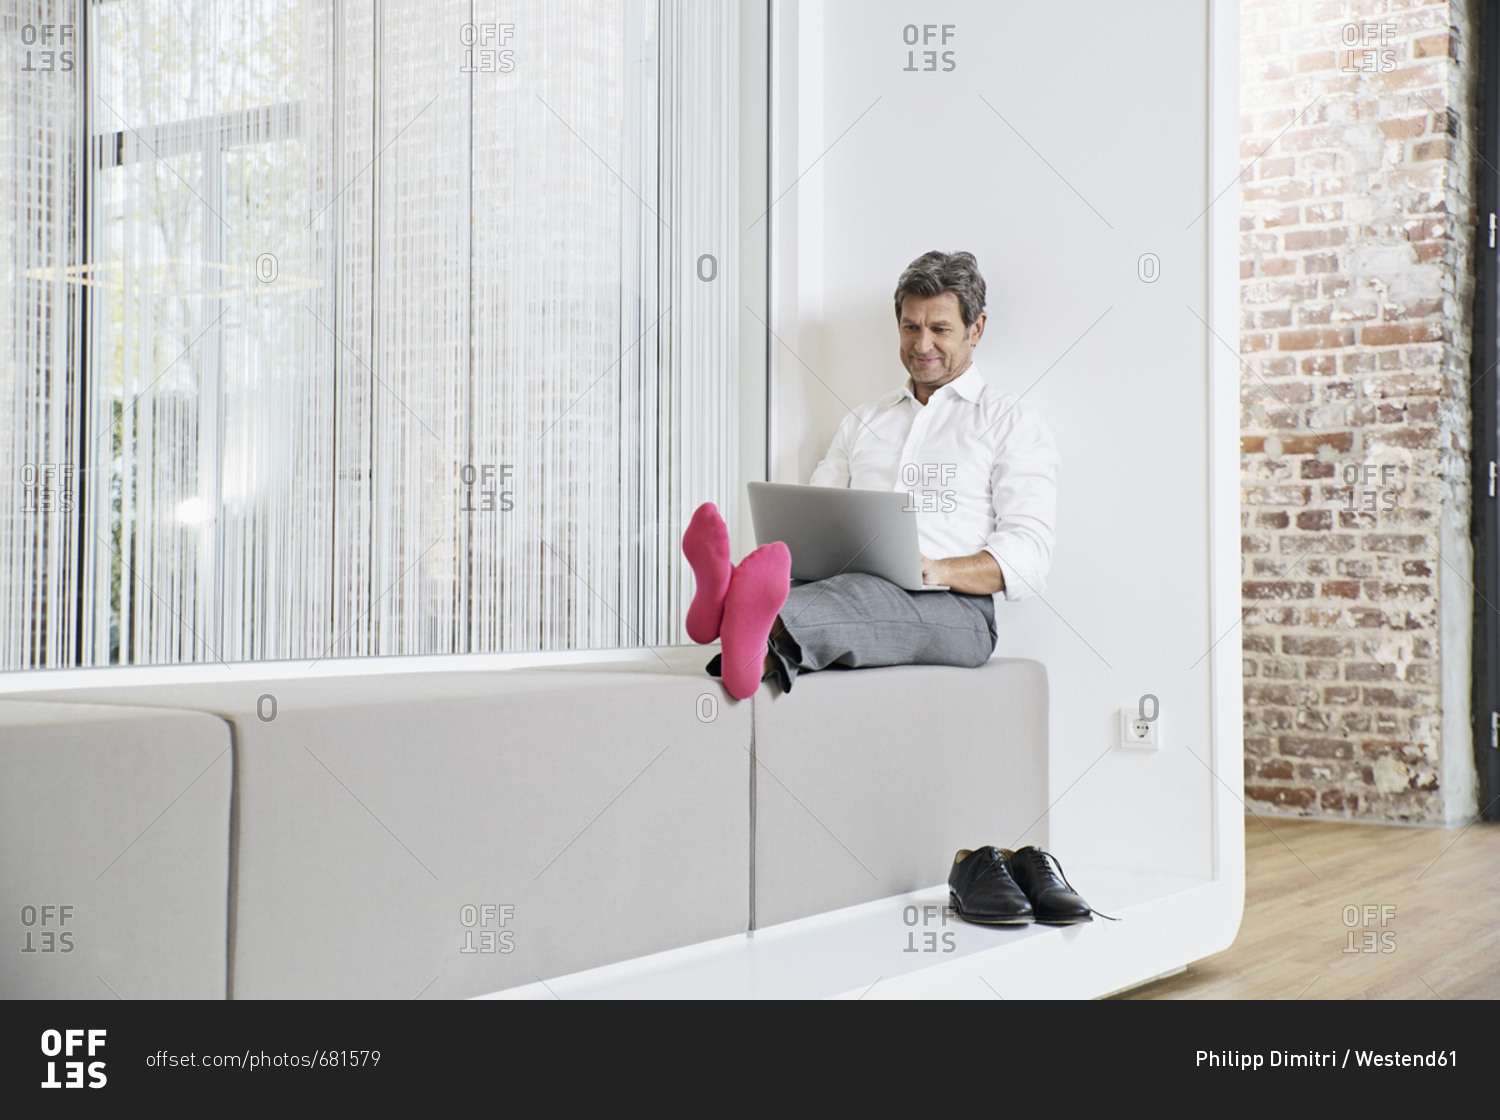 Businessman with pink socks using laptop in office